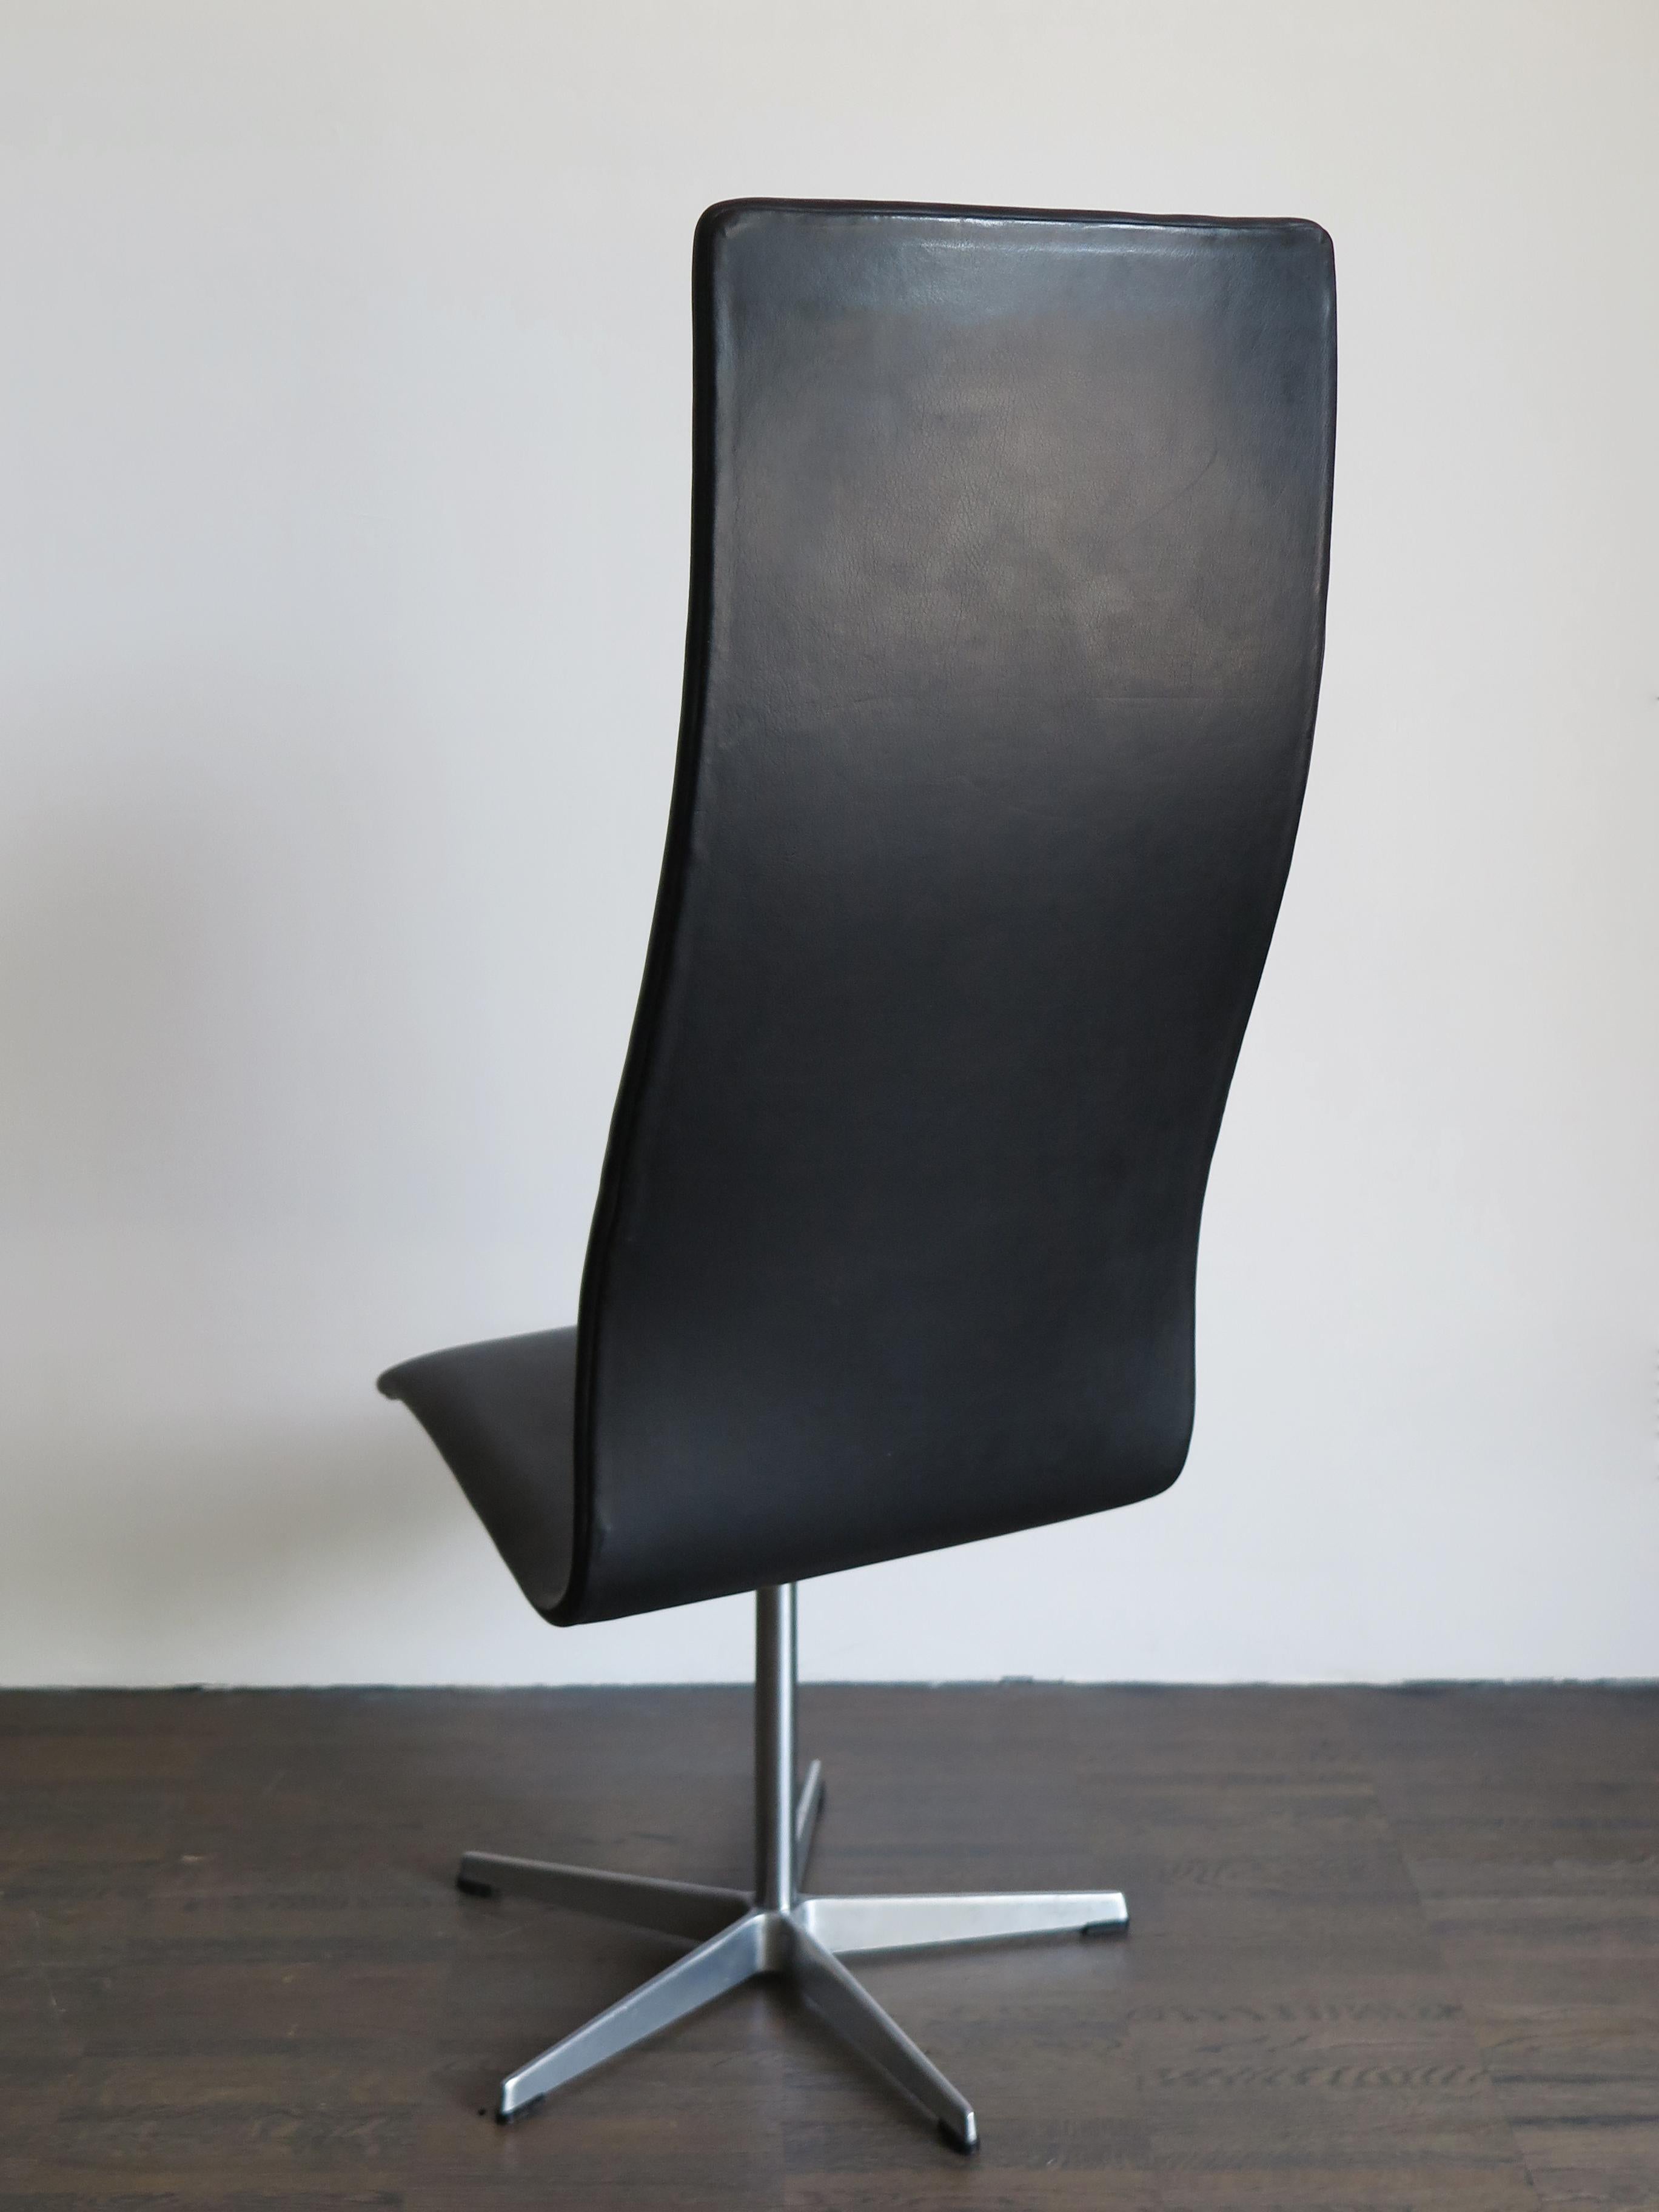 Mid-17th Century Oxford Midcentury Black Leather Chairs by Arne Jacobsen for Fritz Hansen, 1960s For Sale